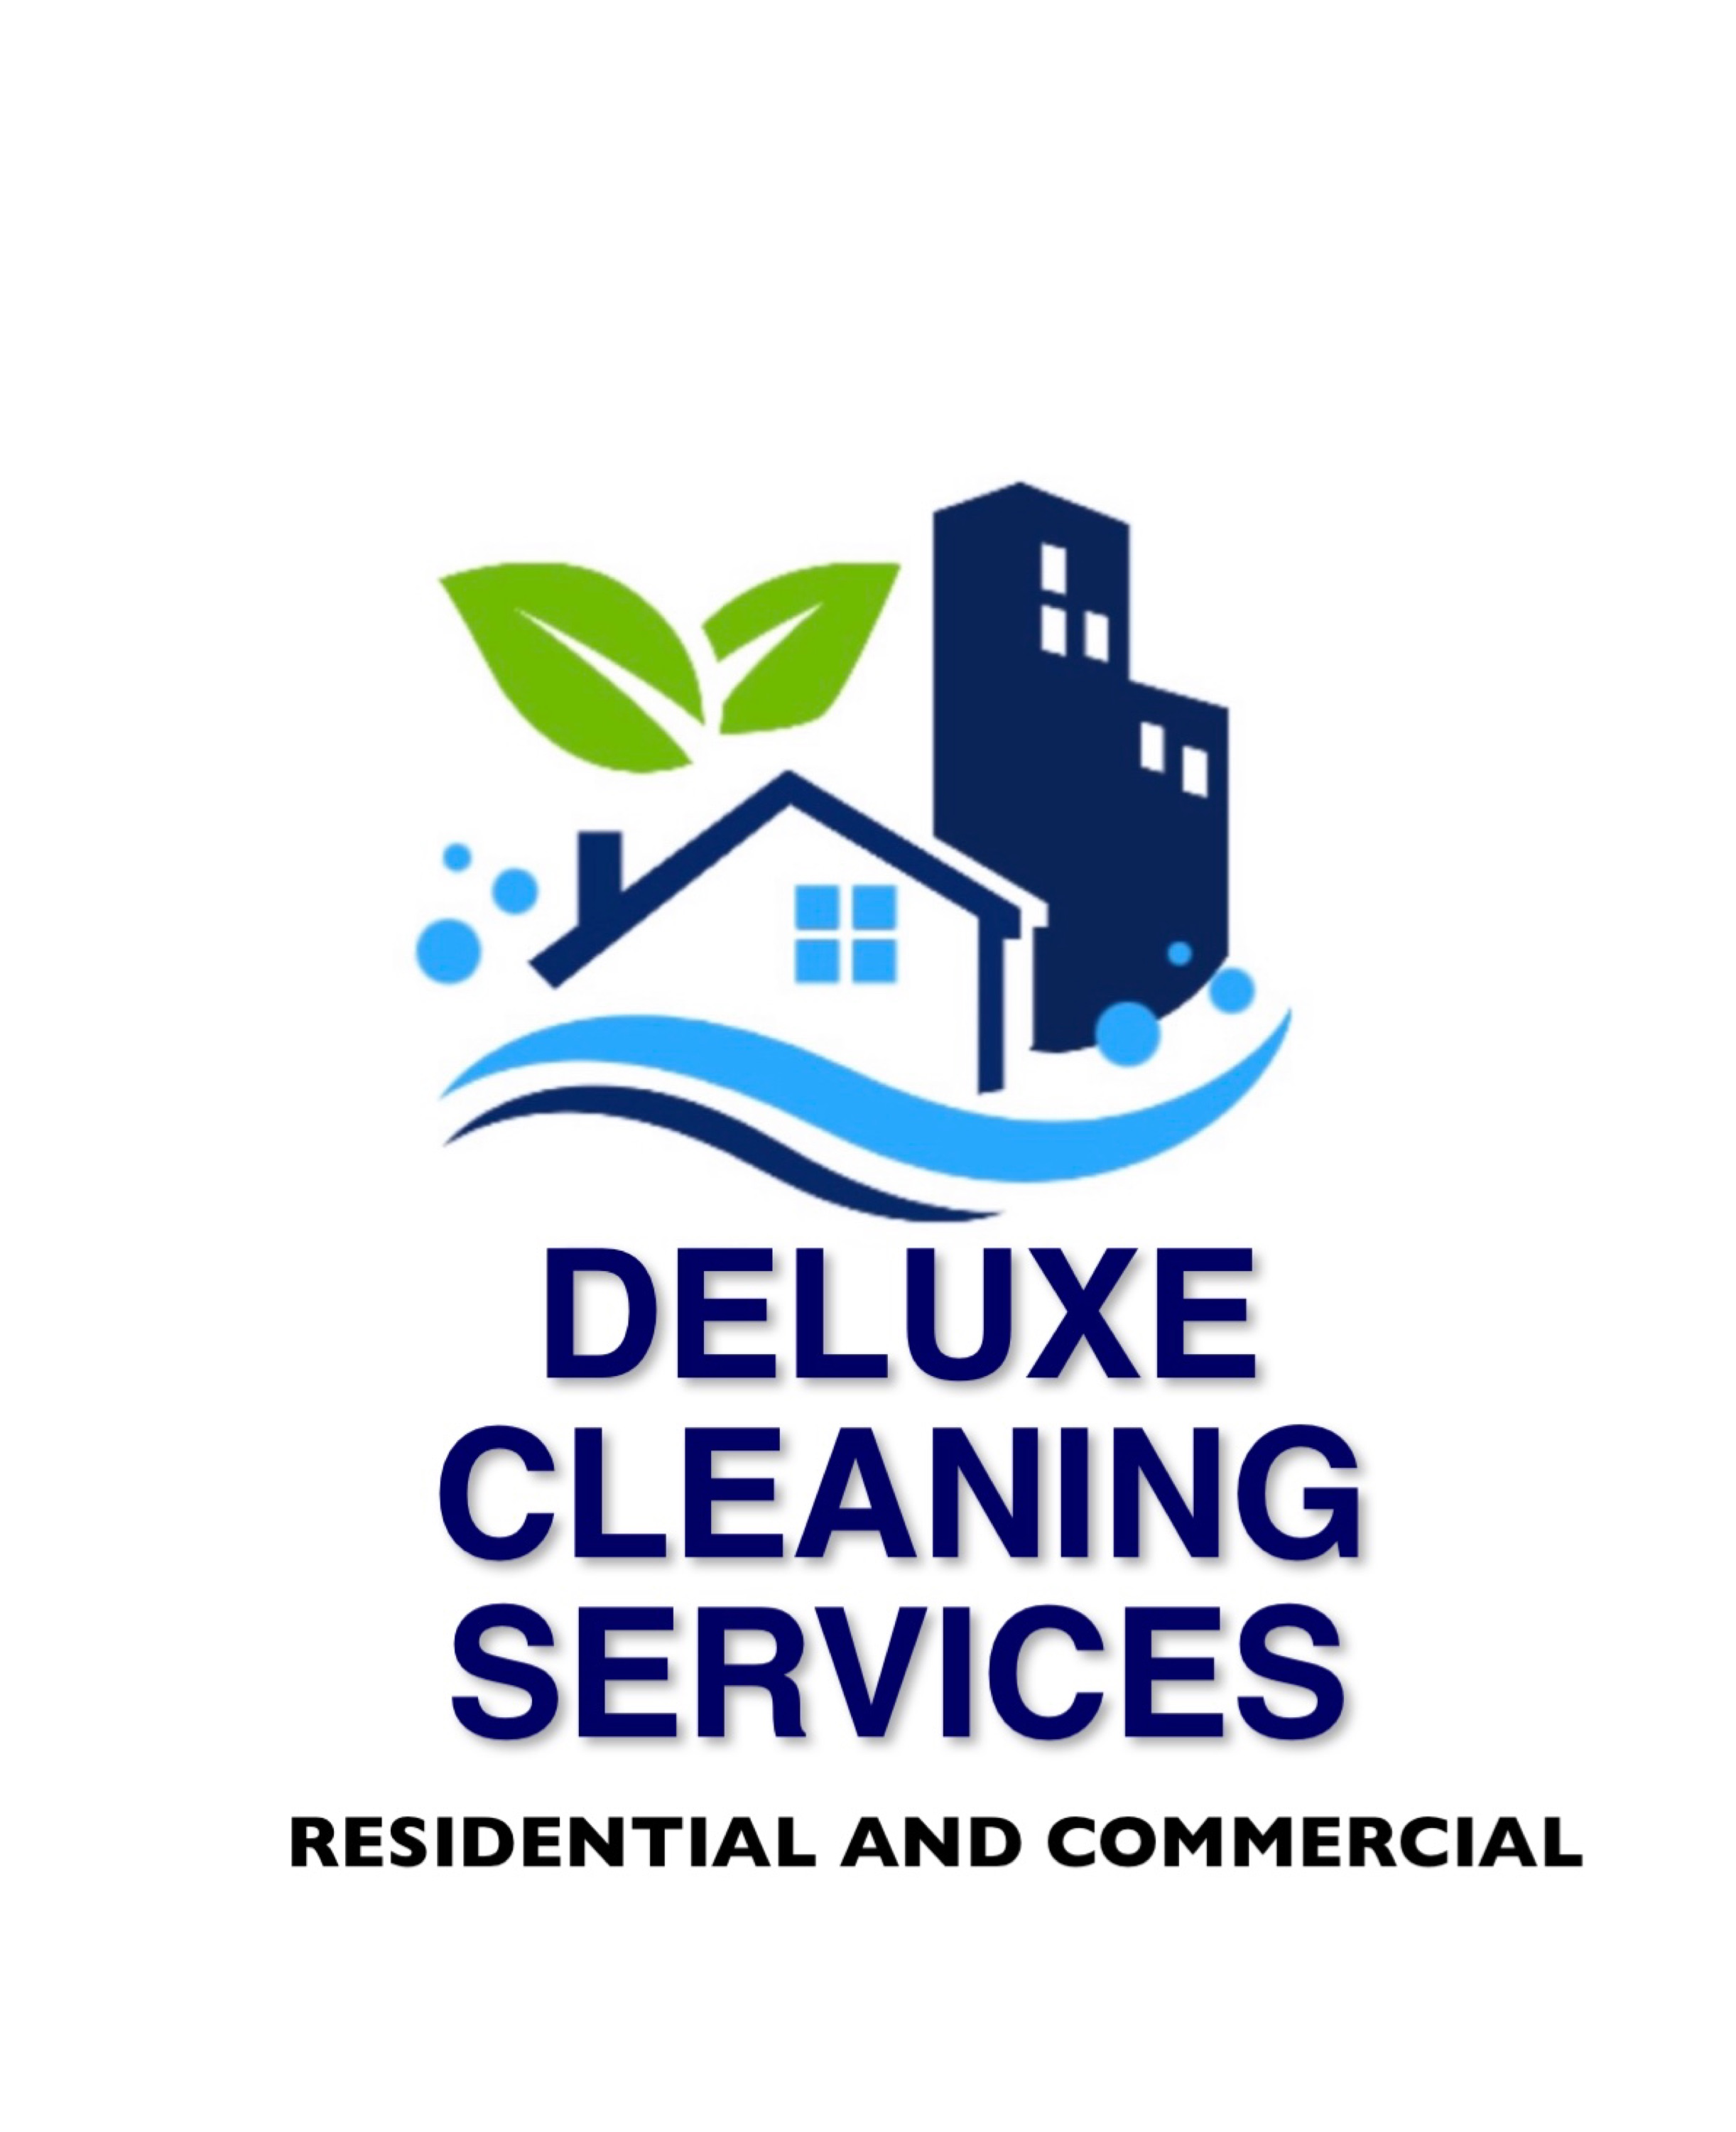 Deluxe Cleaning Service Logo